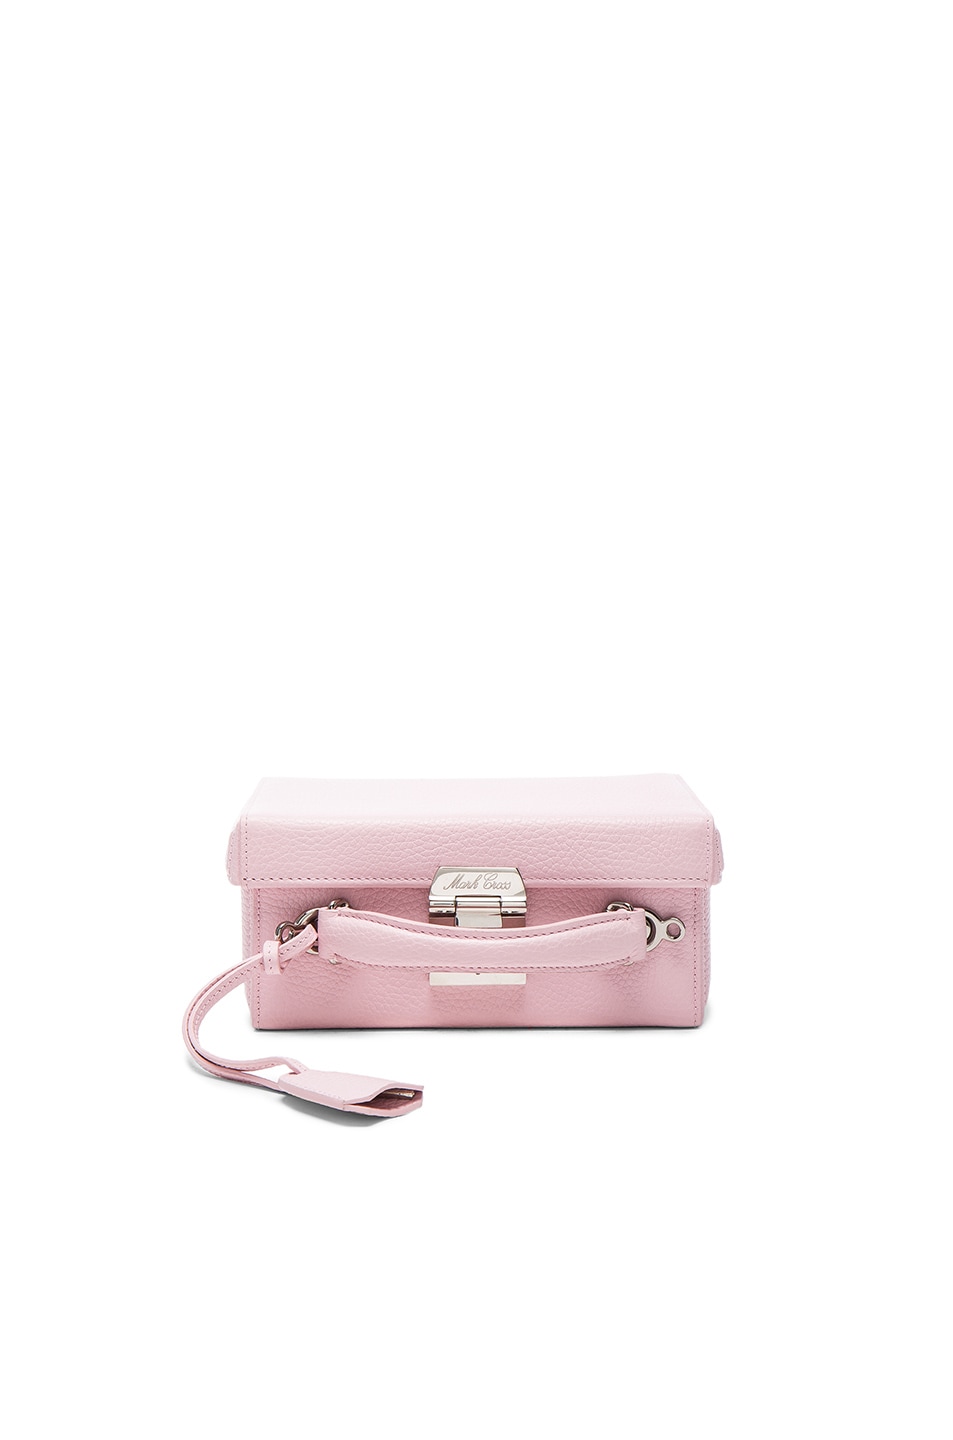 Image 1 of Mark Cross Grace Small Box Bag in Pale Pink Pebble